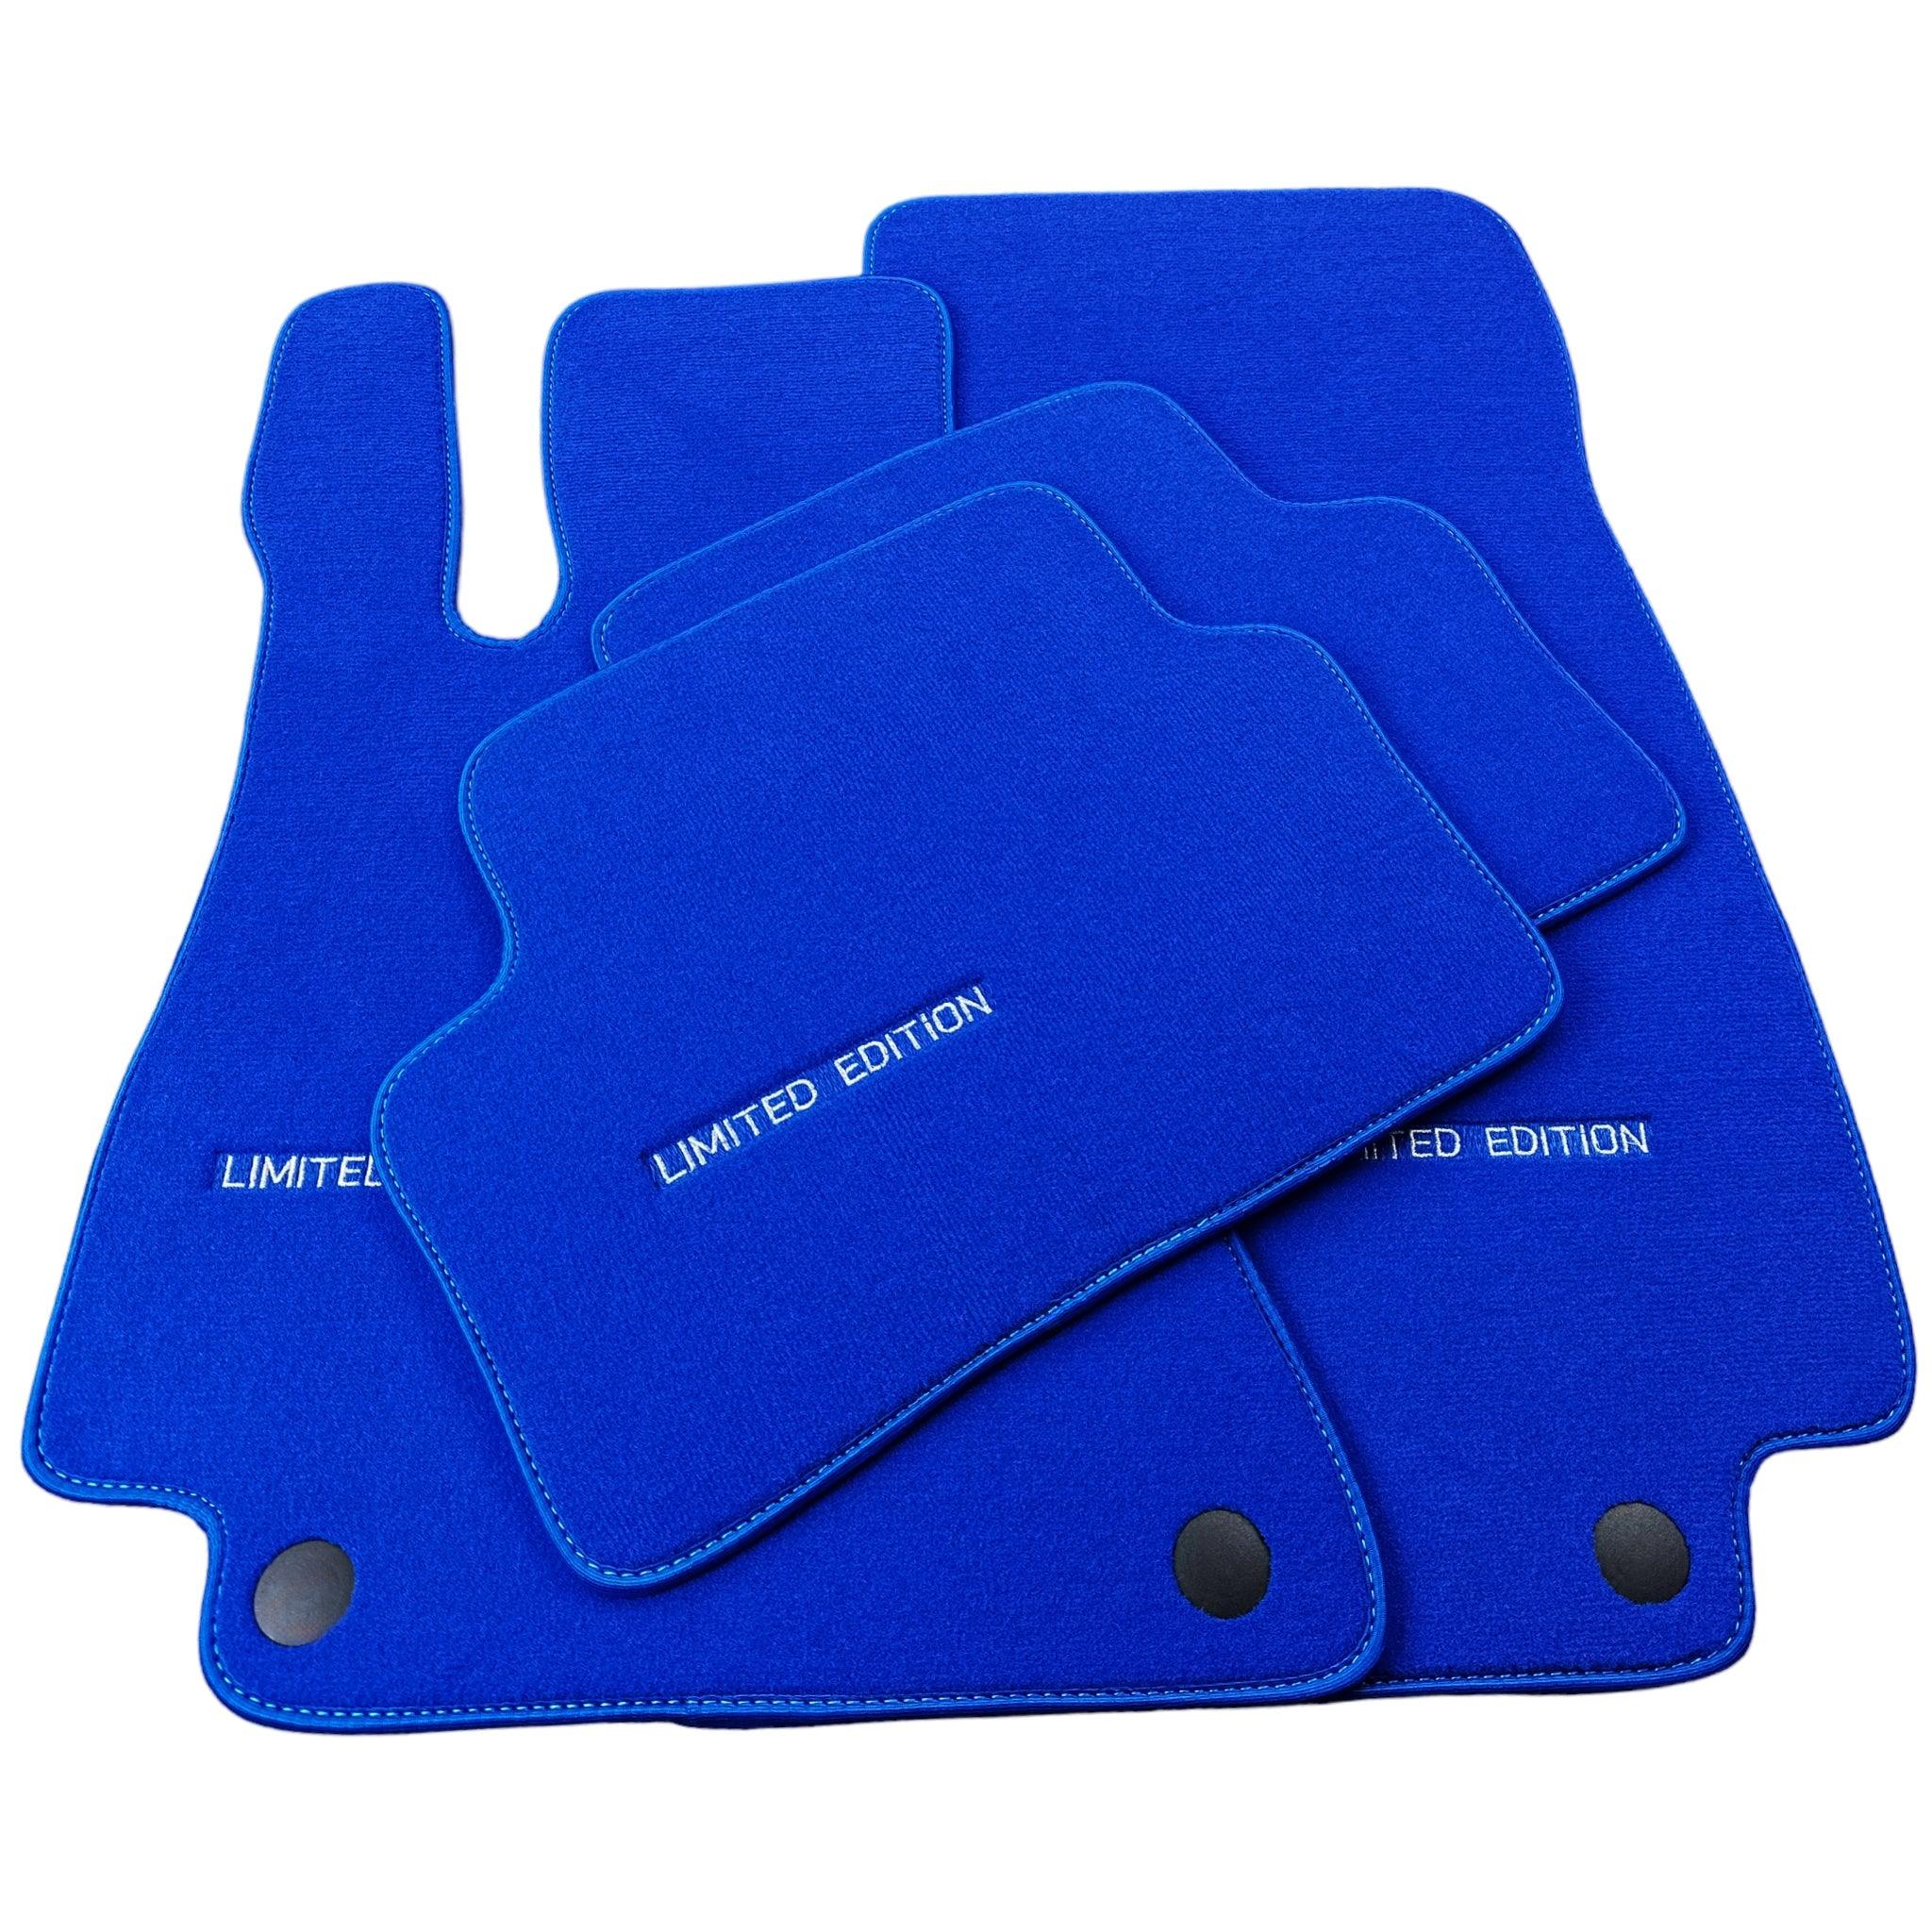 Blue Floor Mats For Mercedes Benz S-Class W140 (1991-1998) | Limited Edition